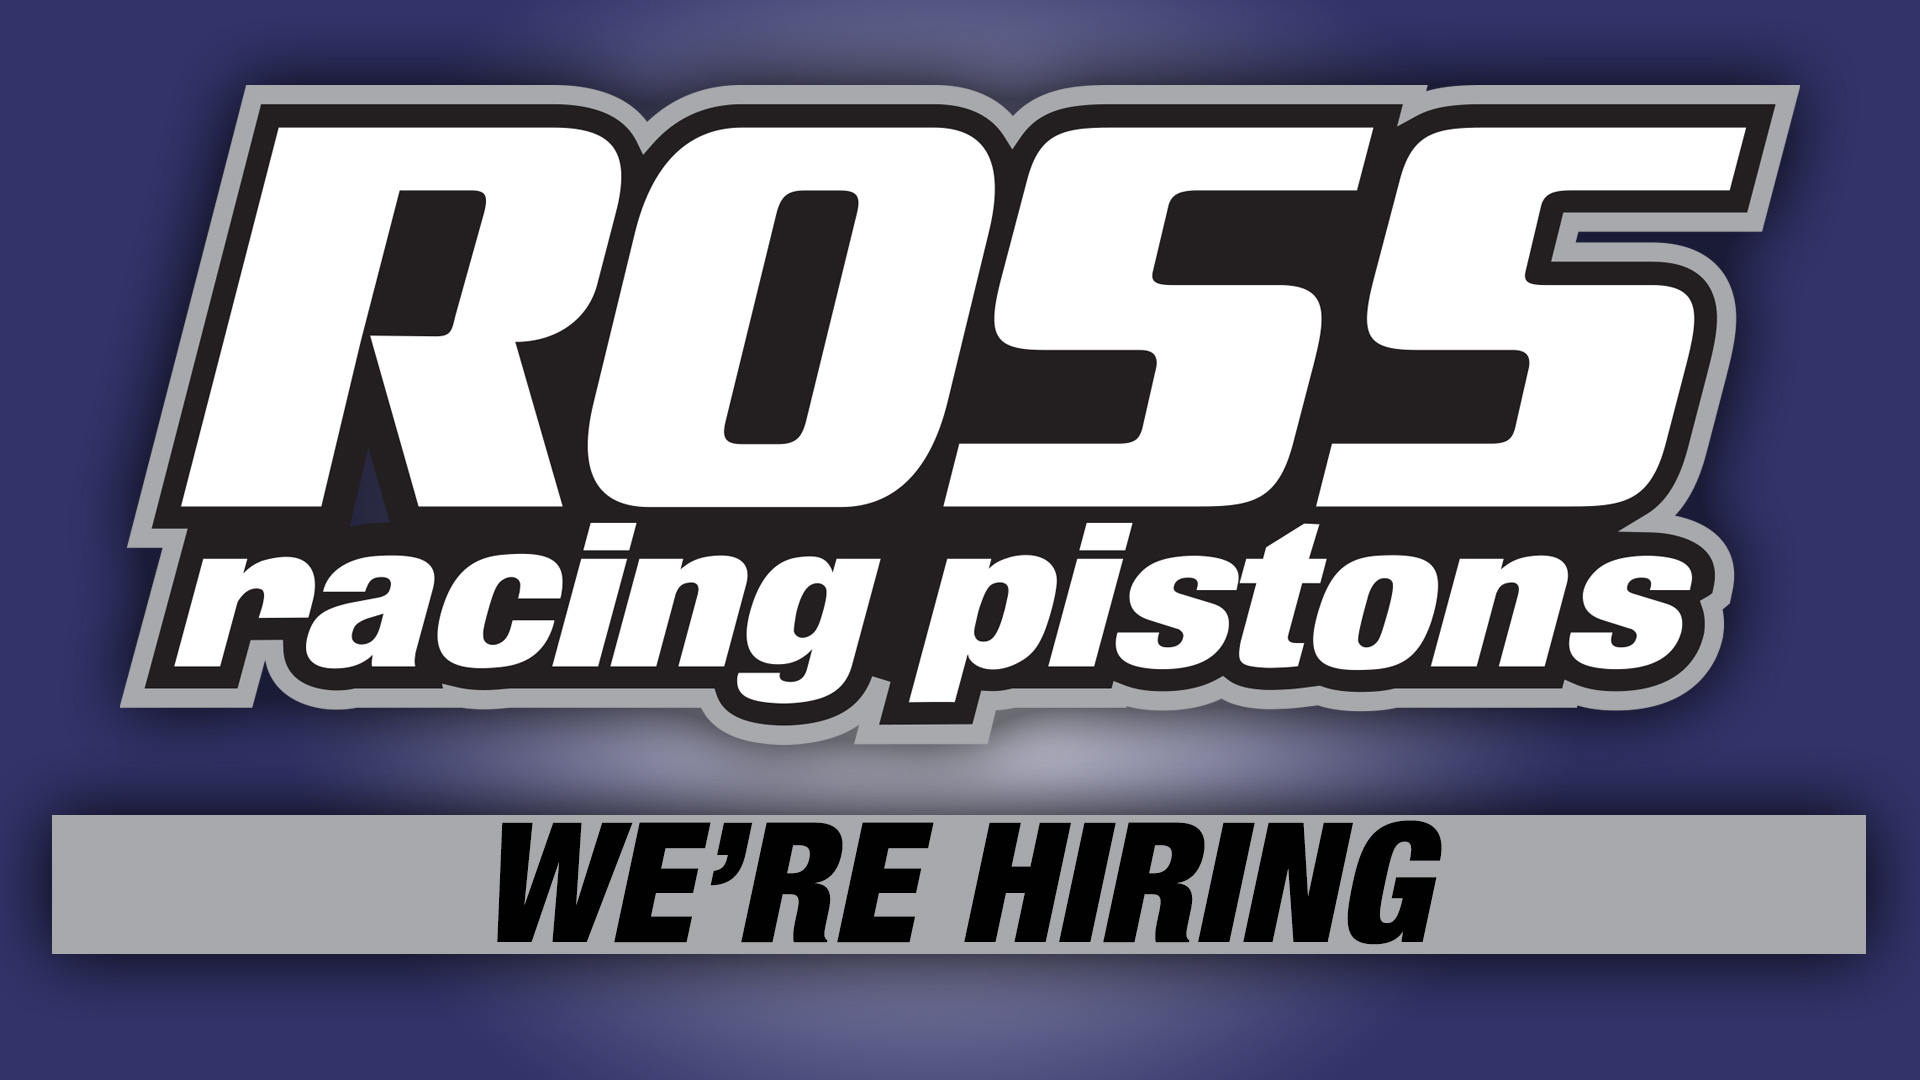 Ross Pistons Hiring Page